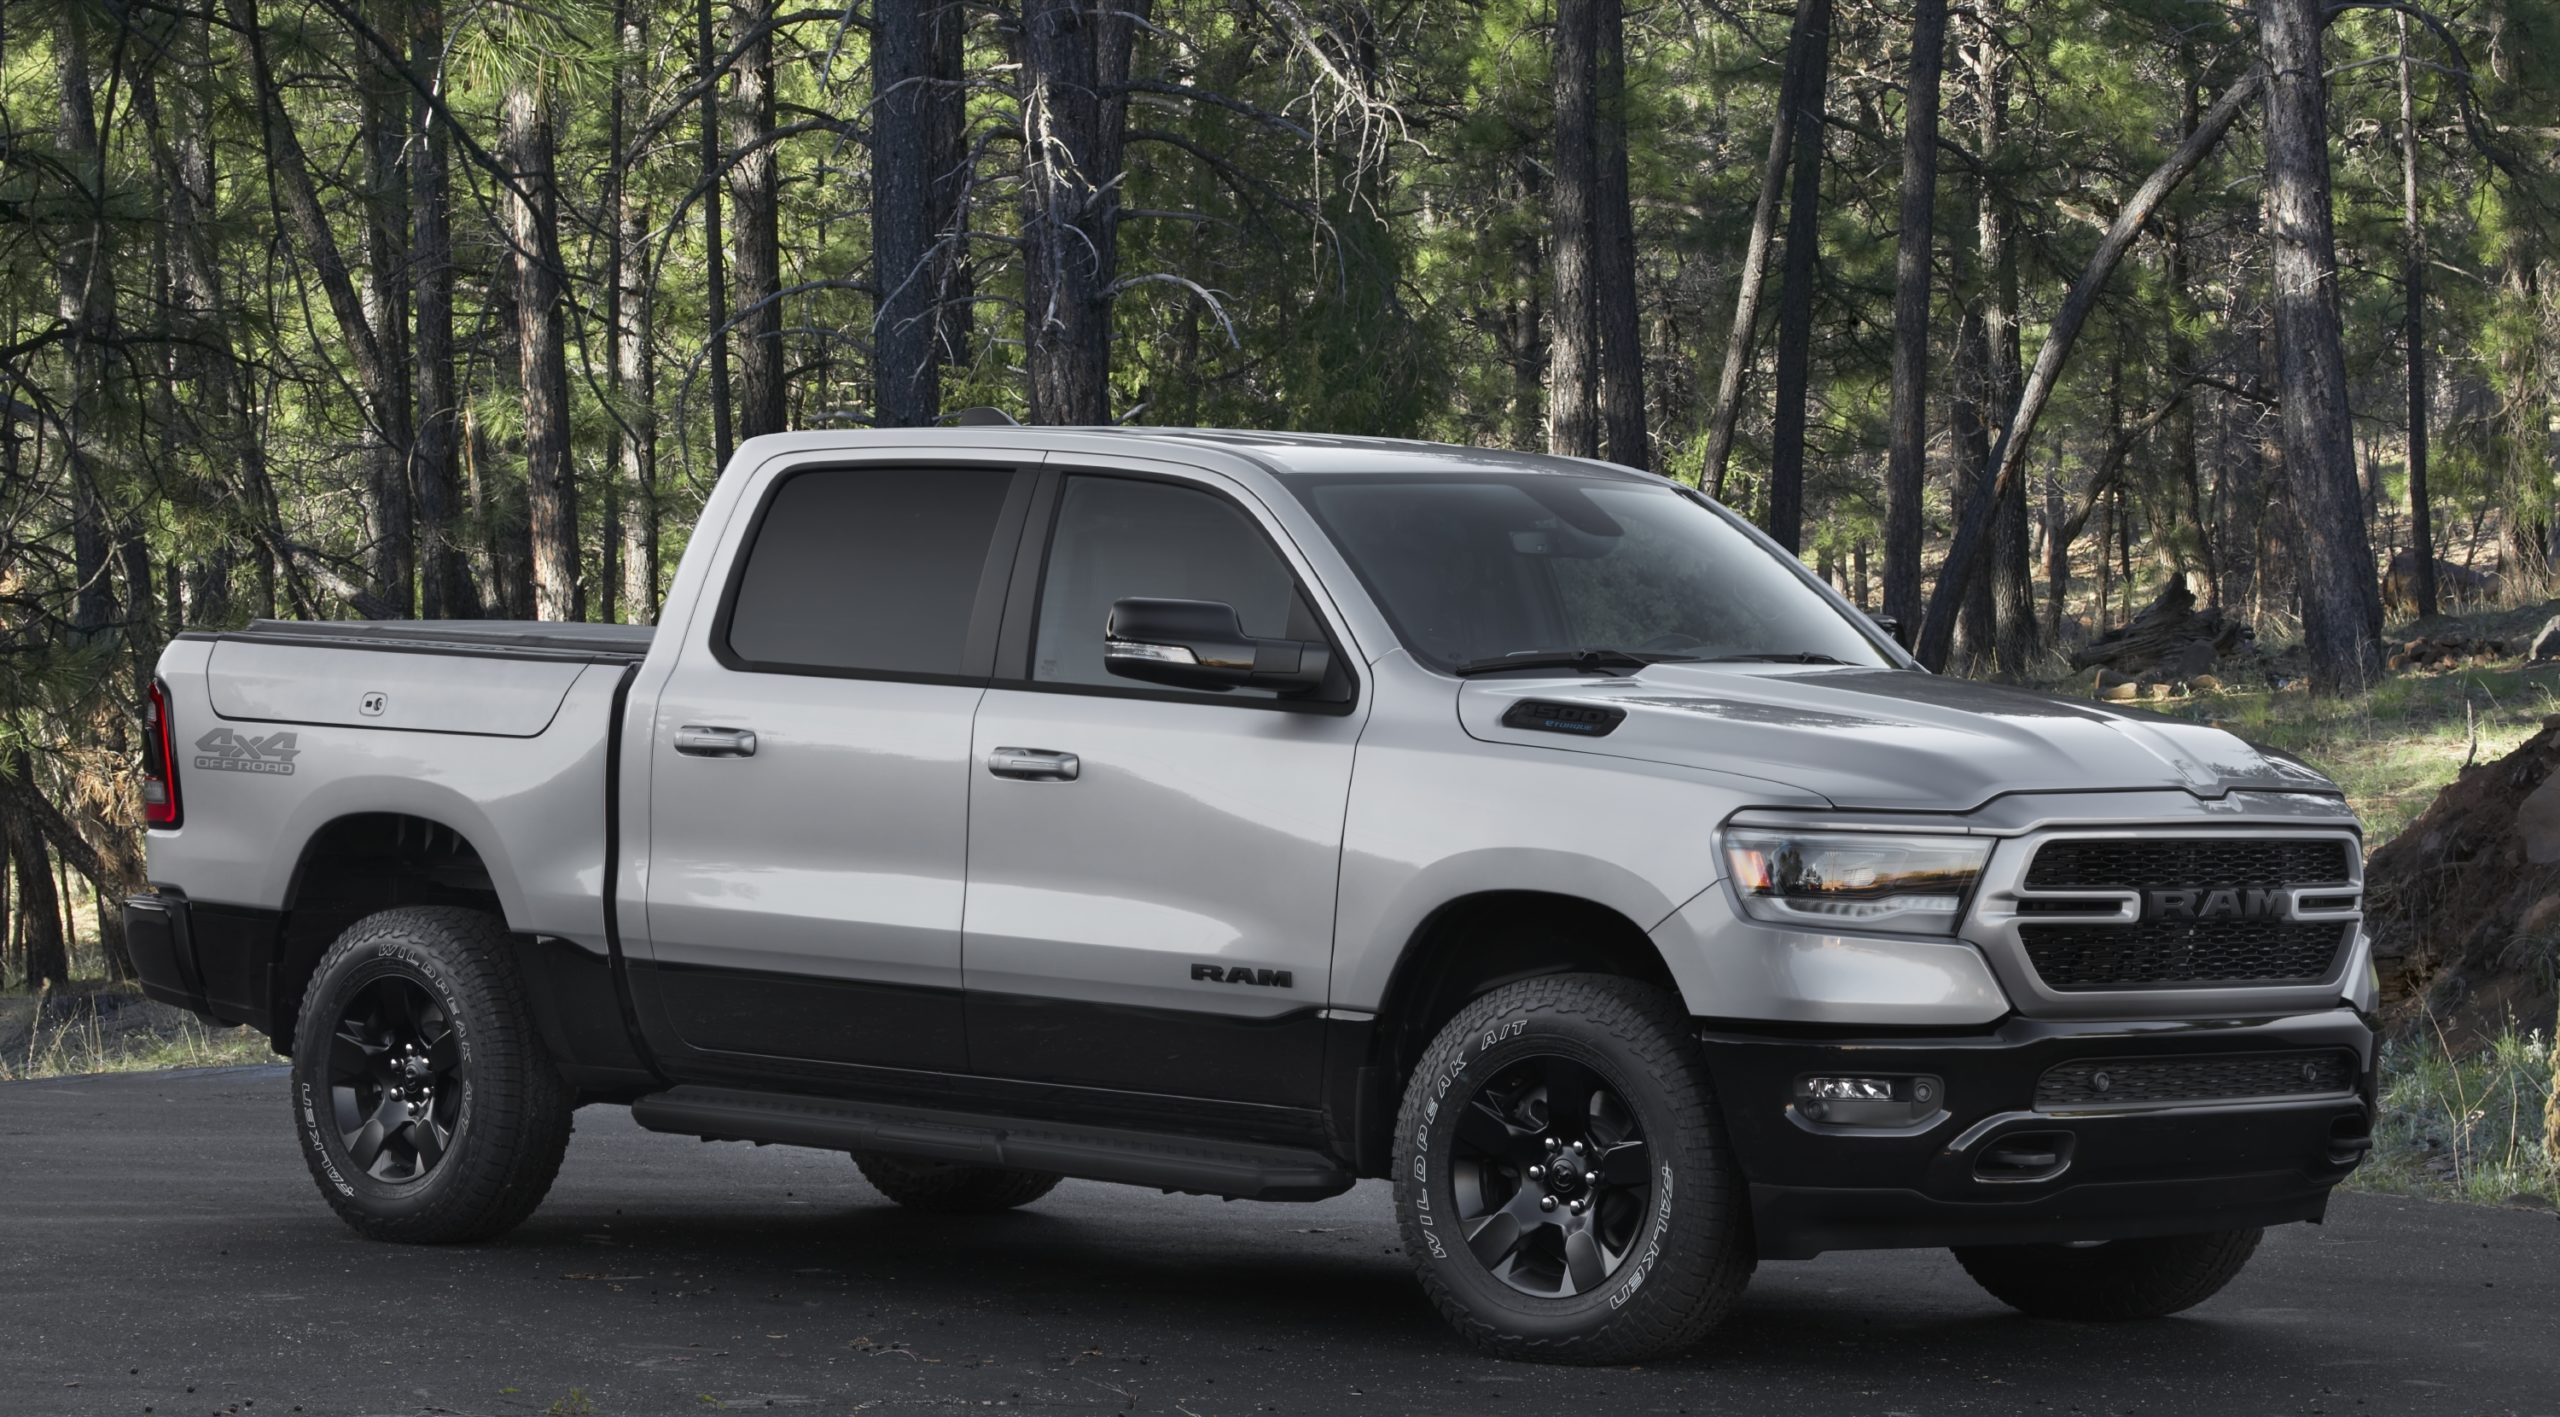 Ram 1500 BackCountry Edition Targets Improved Off-Road Performance | THE SHOP